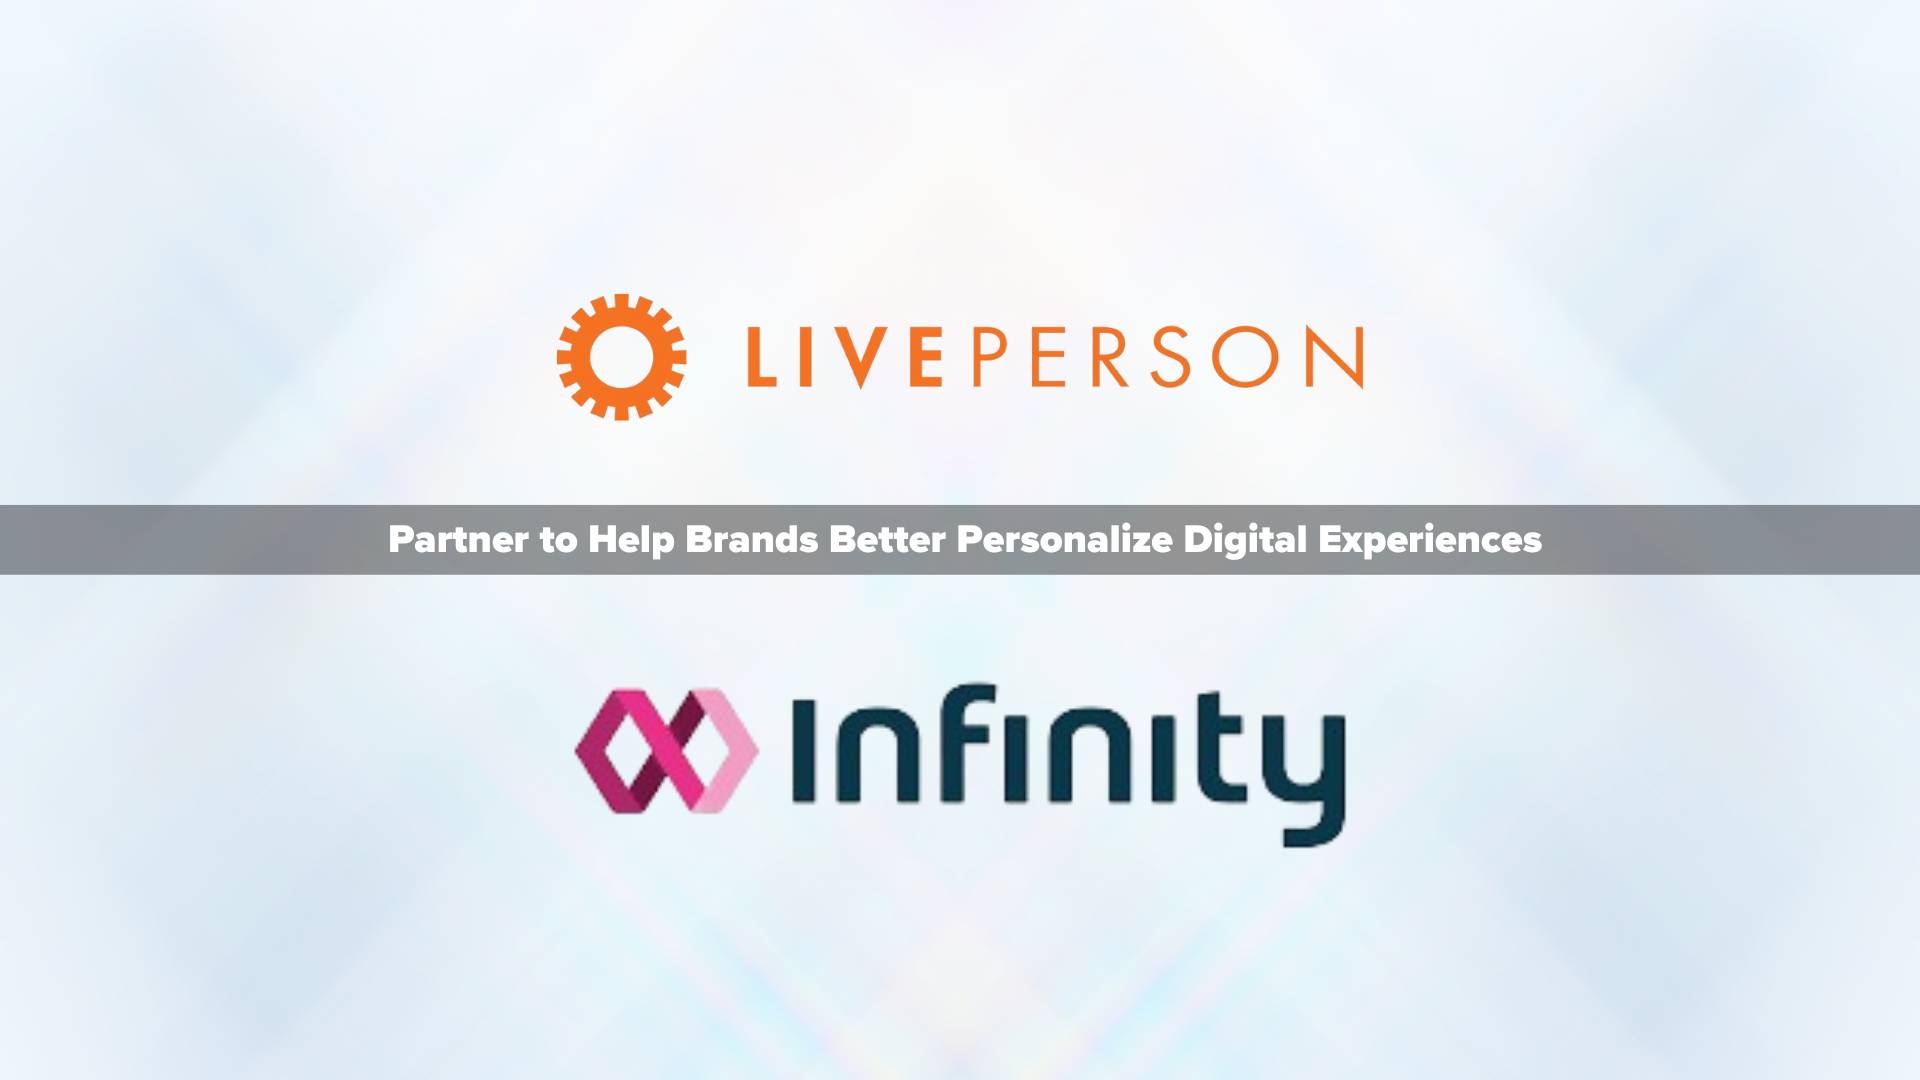 LivePerson and Infinity partner to help brands better personalize digital experiences through the power of conversational intelligence